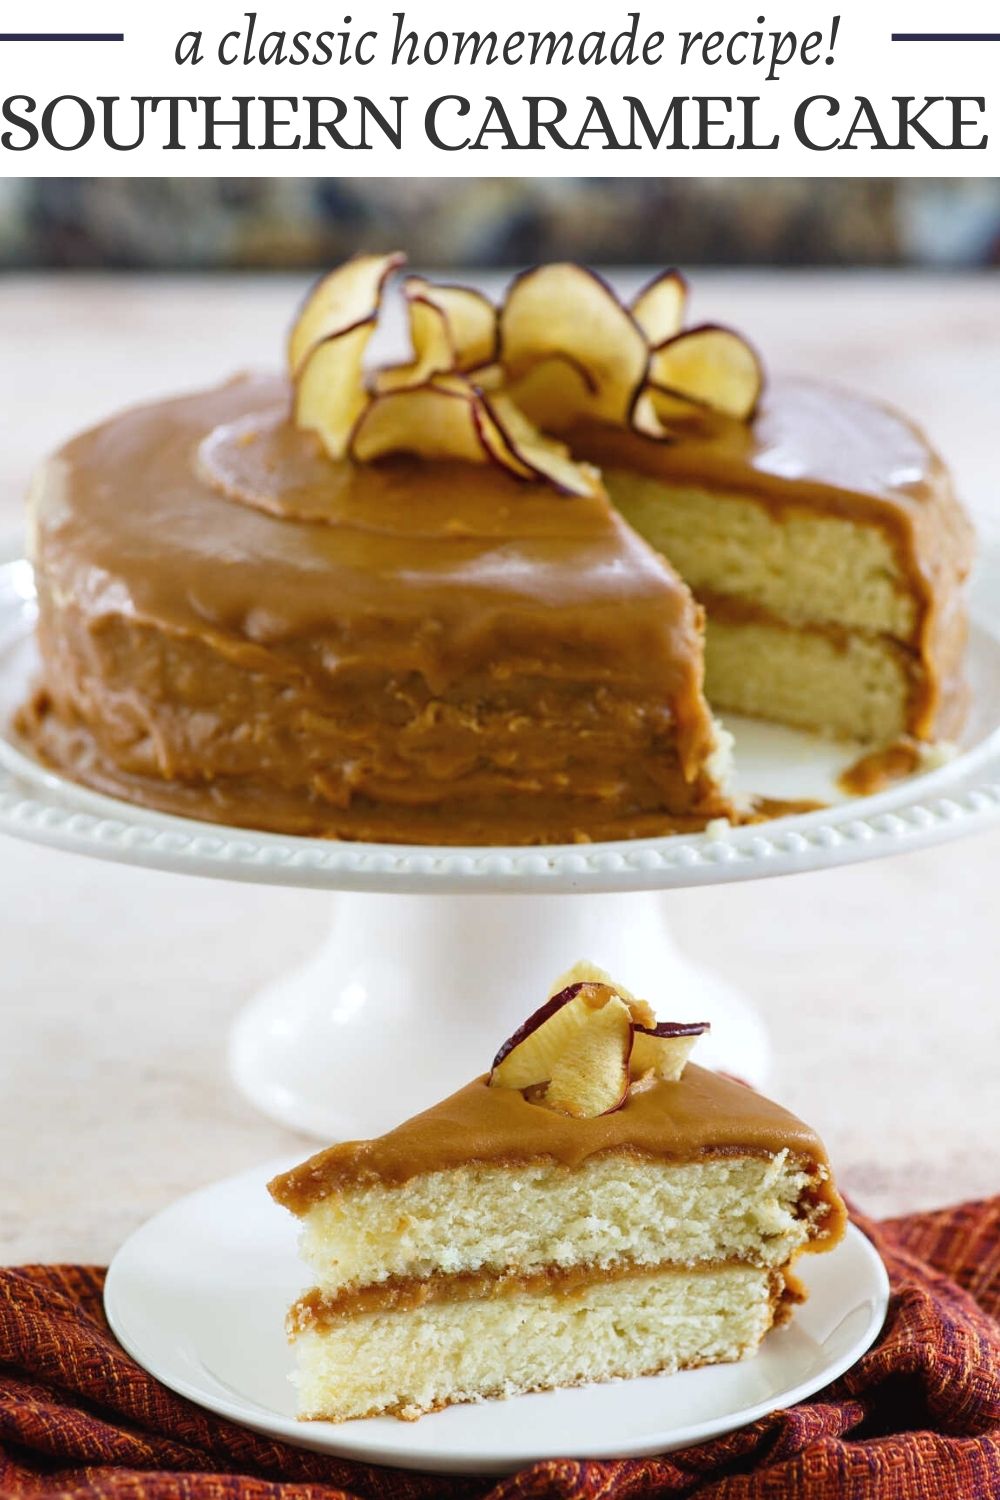 This old fashioned recipe for classic southern caramel cake is hard to beat. It features a butter vanilla cake base and rich caramel frosting. It is a must make dessert.